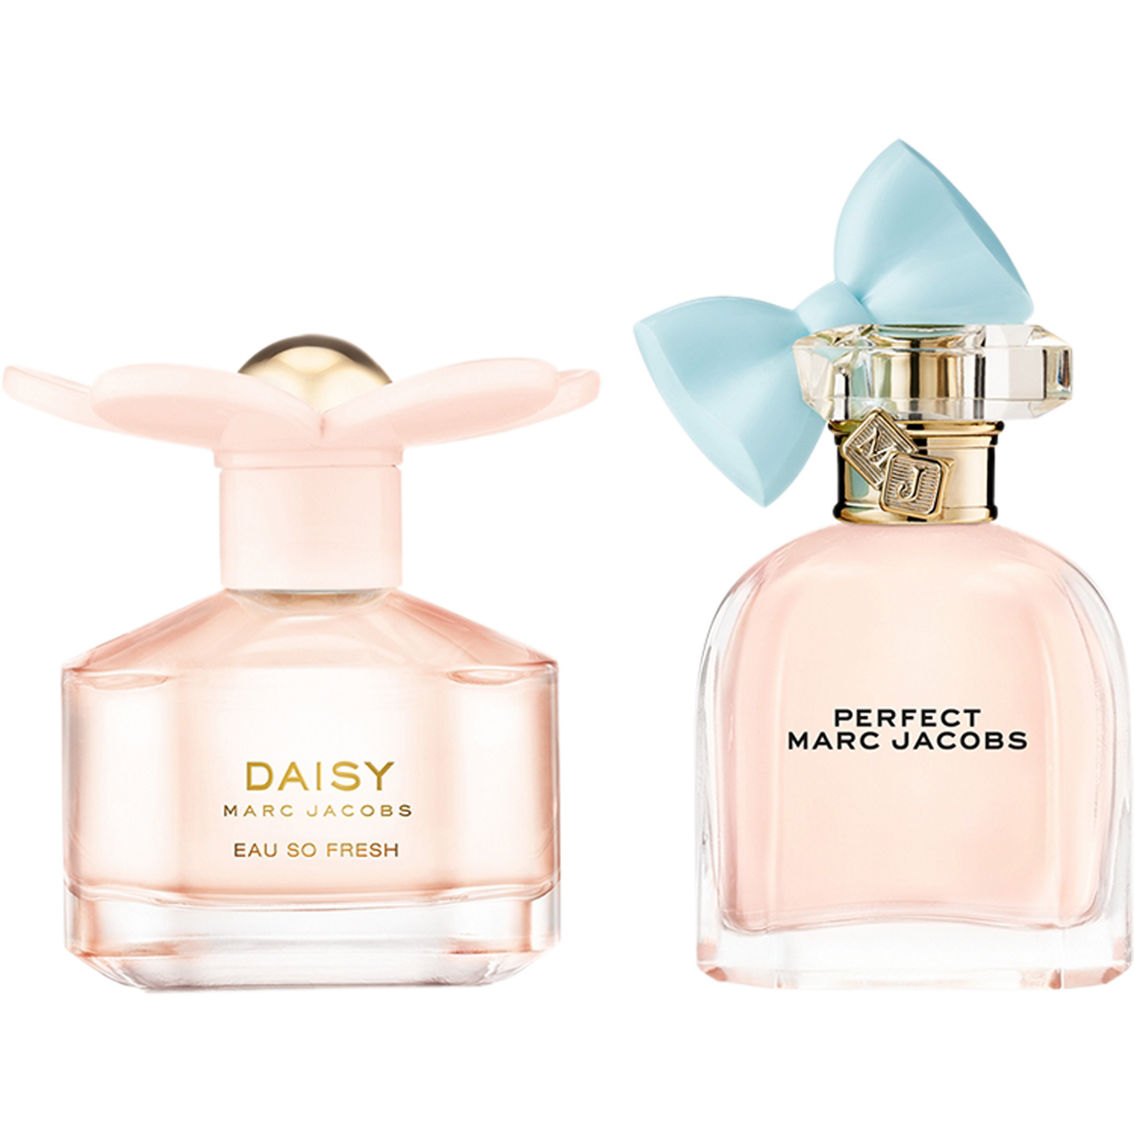 Marc Jacobs Daisy & Perfect Mini Duo Set - Image 2 of 3